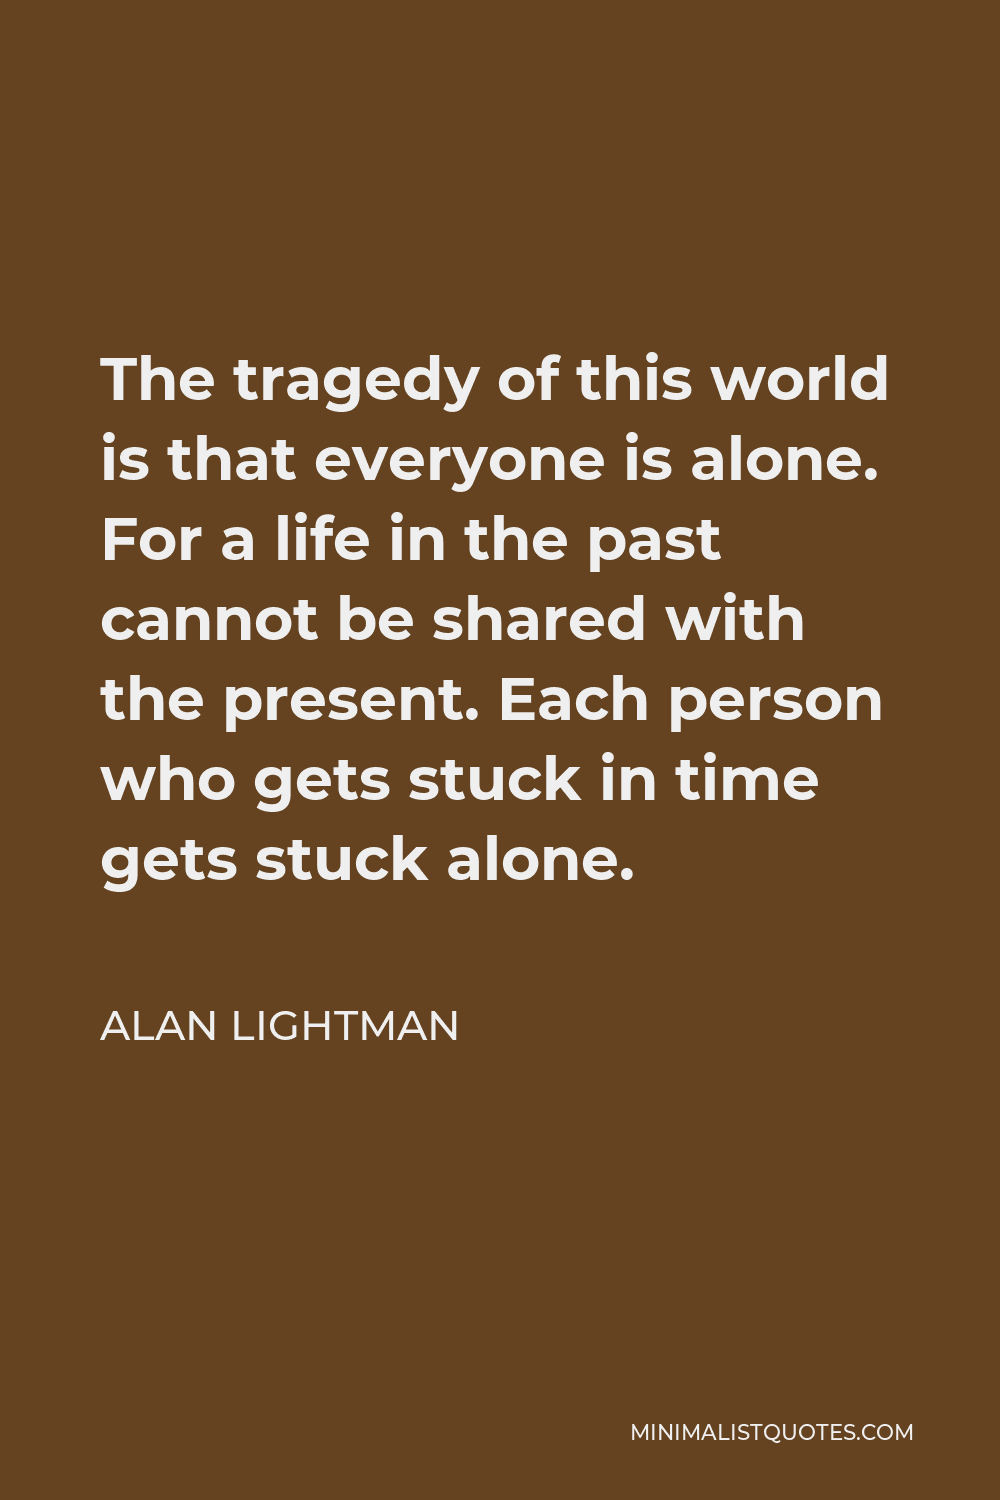 Alan Lightman Quote - The tragedy of this world is that everyone is alone. For a life in the past cannot be shared with the present.